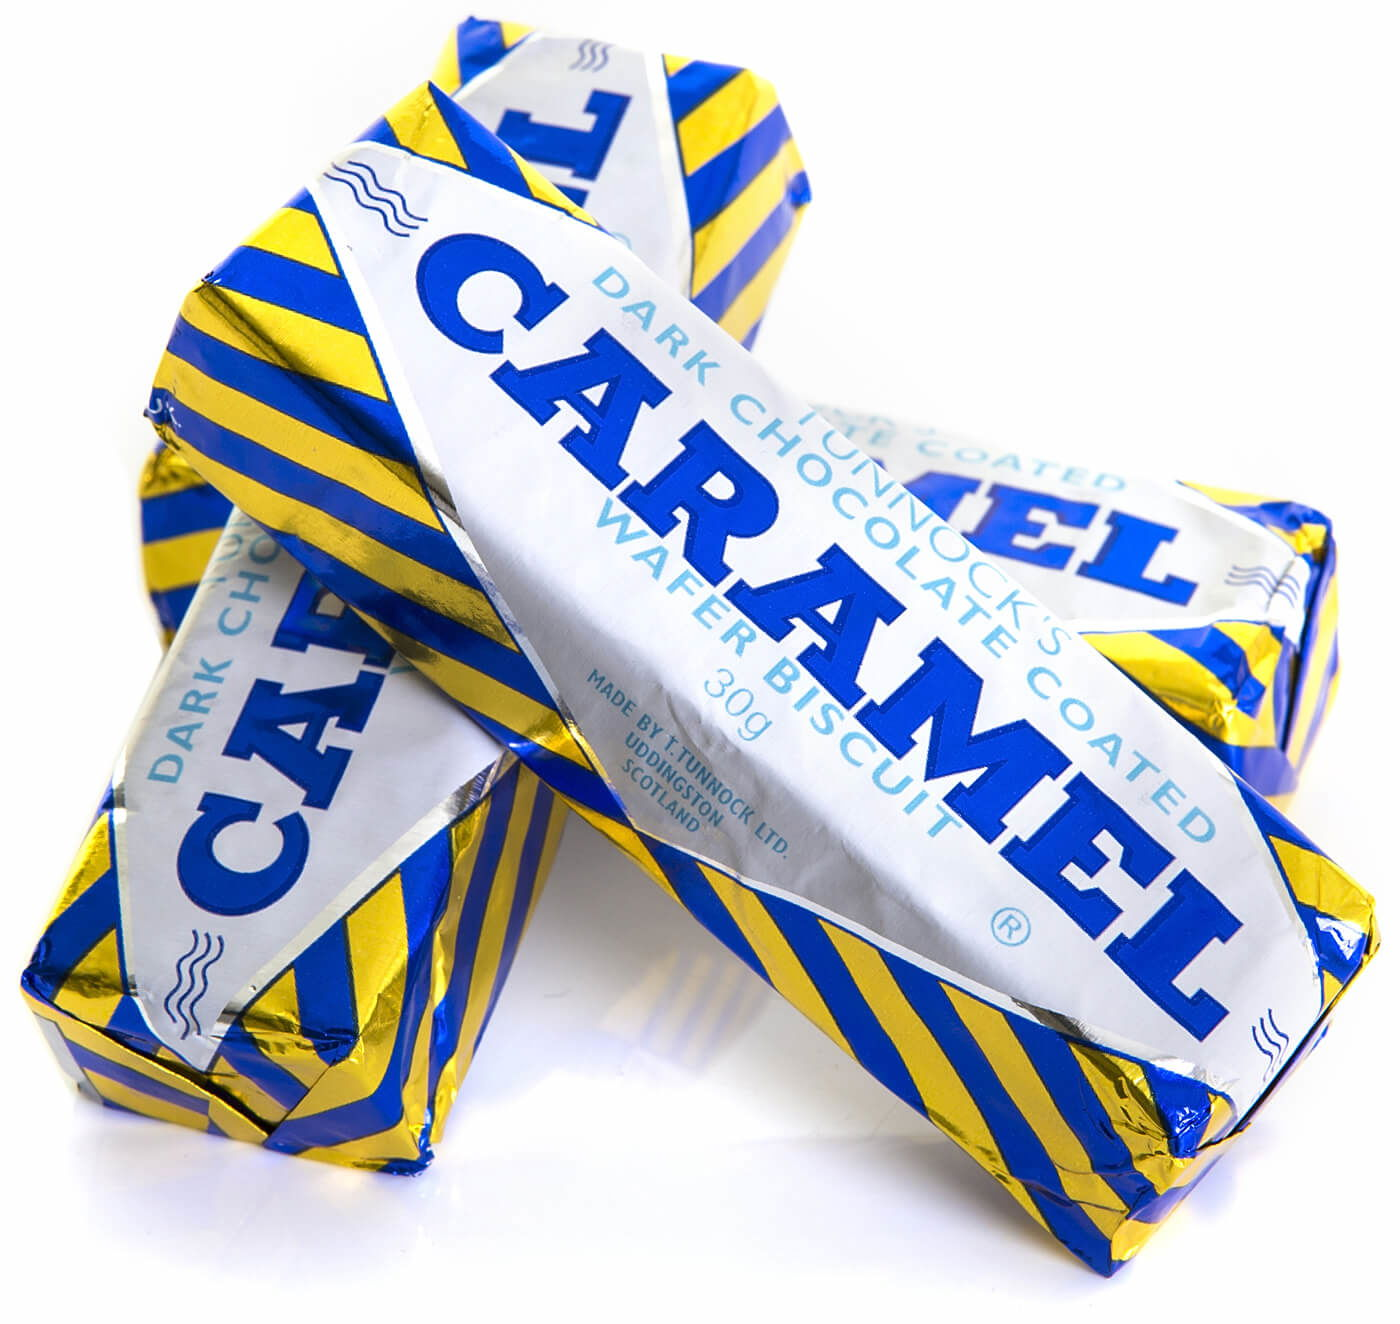 A stack of 3 Tunnock's Dark Chocolate Caramel Wafers, in blue, yellow and white wrappers.